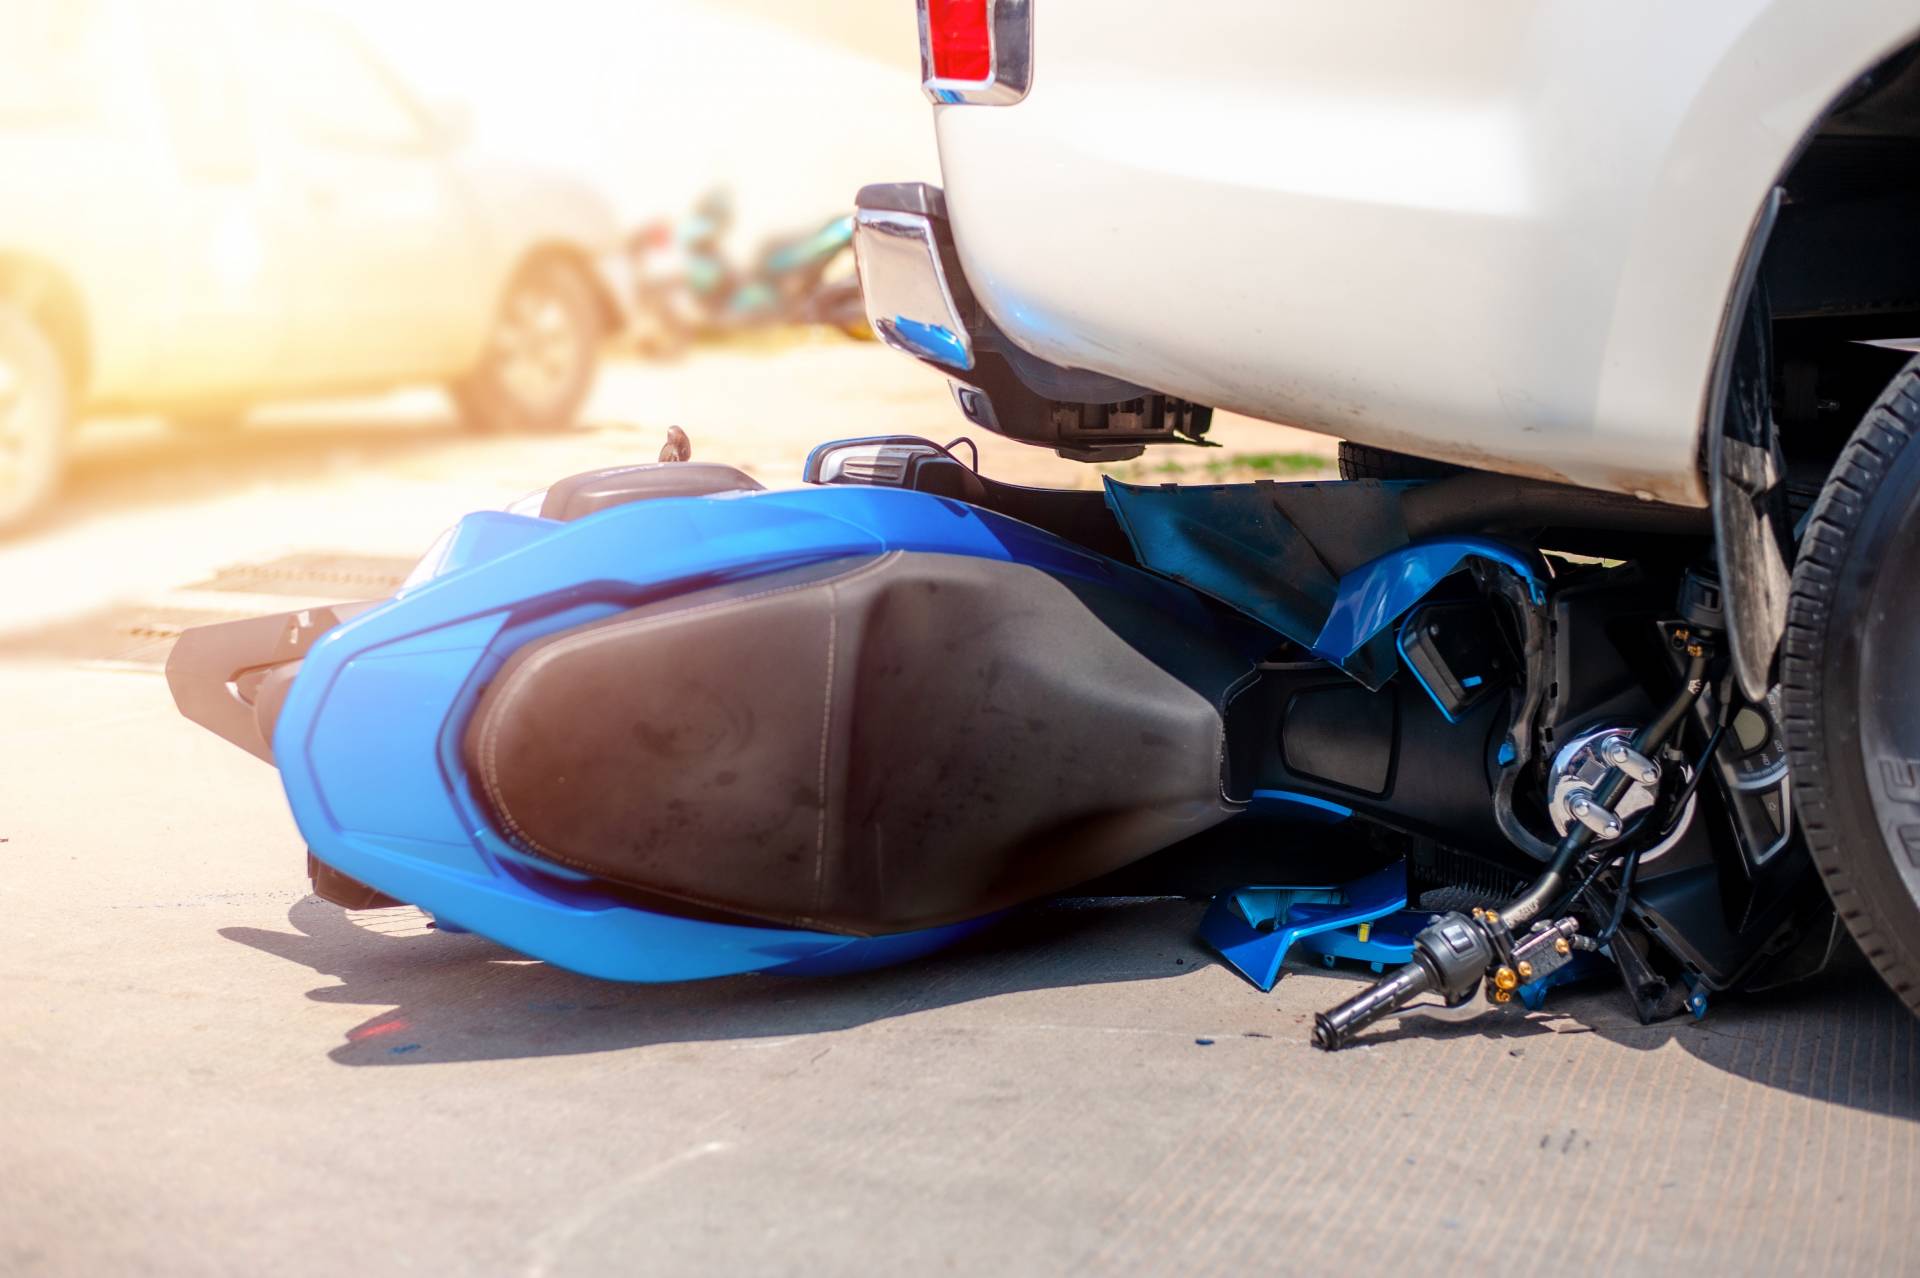 Need an Atlanta motorcycle accident attorney. Contact us today for a free consultation!